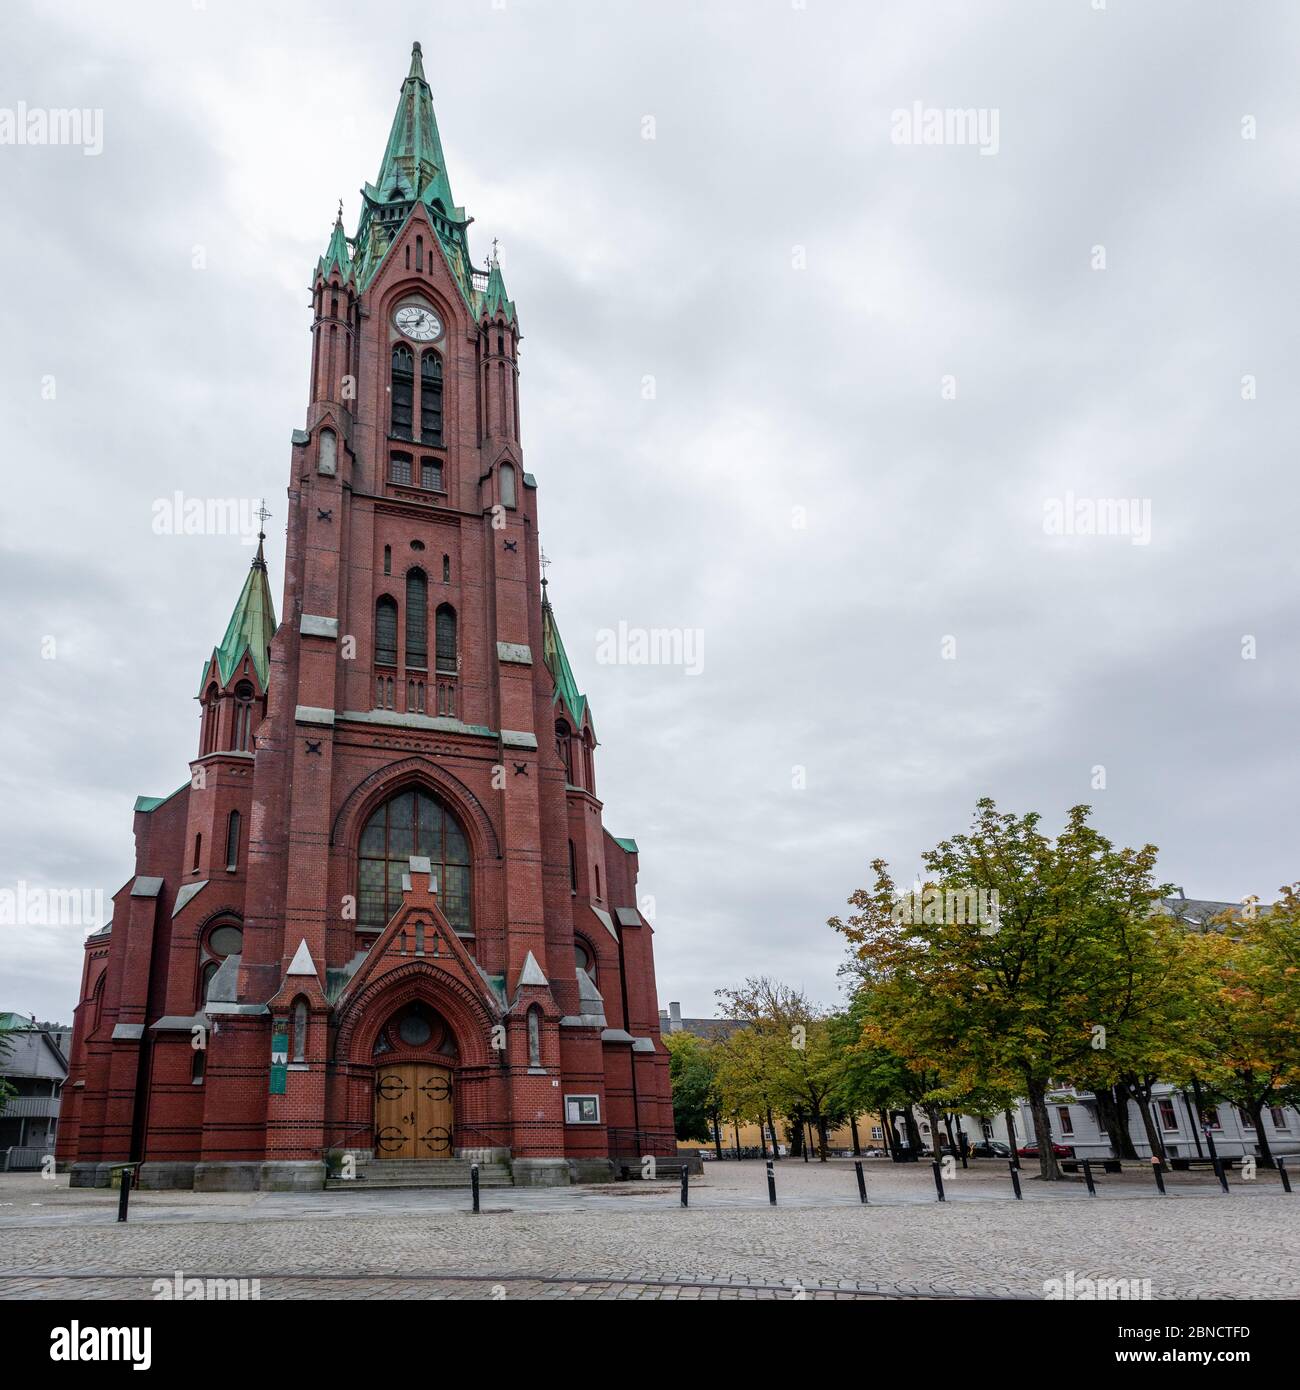 Panoramic view of high St. John's Church (Johanneskirken) in Bergen, Norway. Gothic-revival church with red brick & copper details. Cloudy autumn day Stock Photo